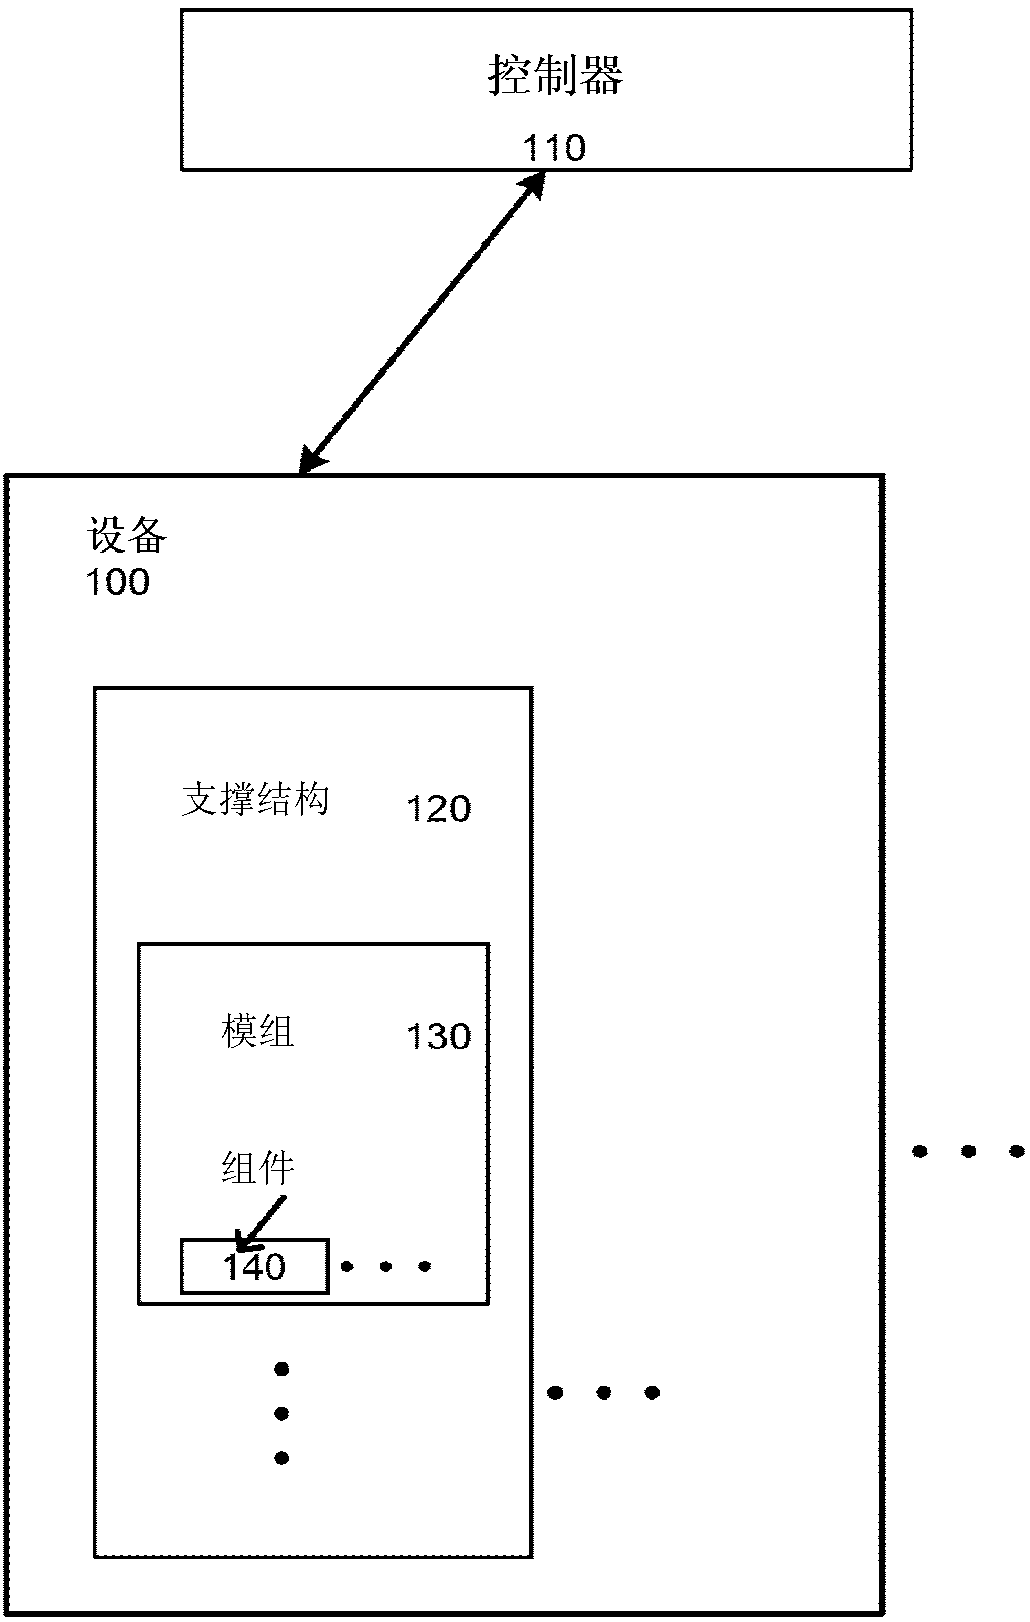 Systems and methods for multi-analysis